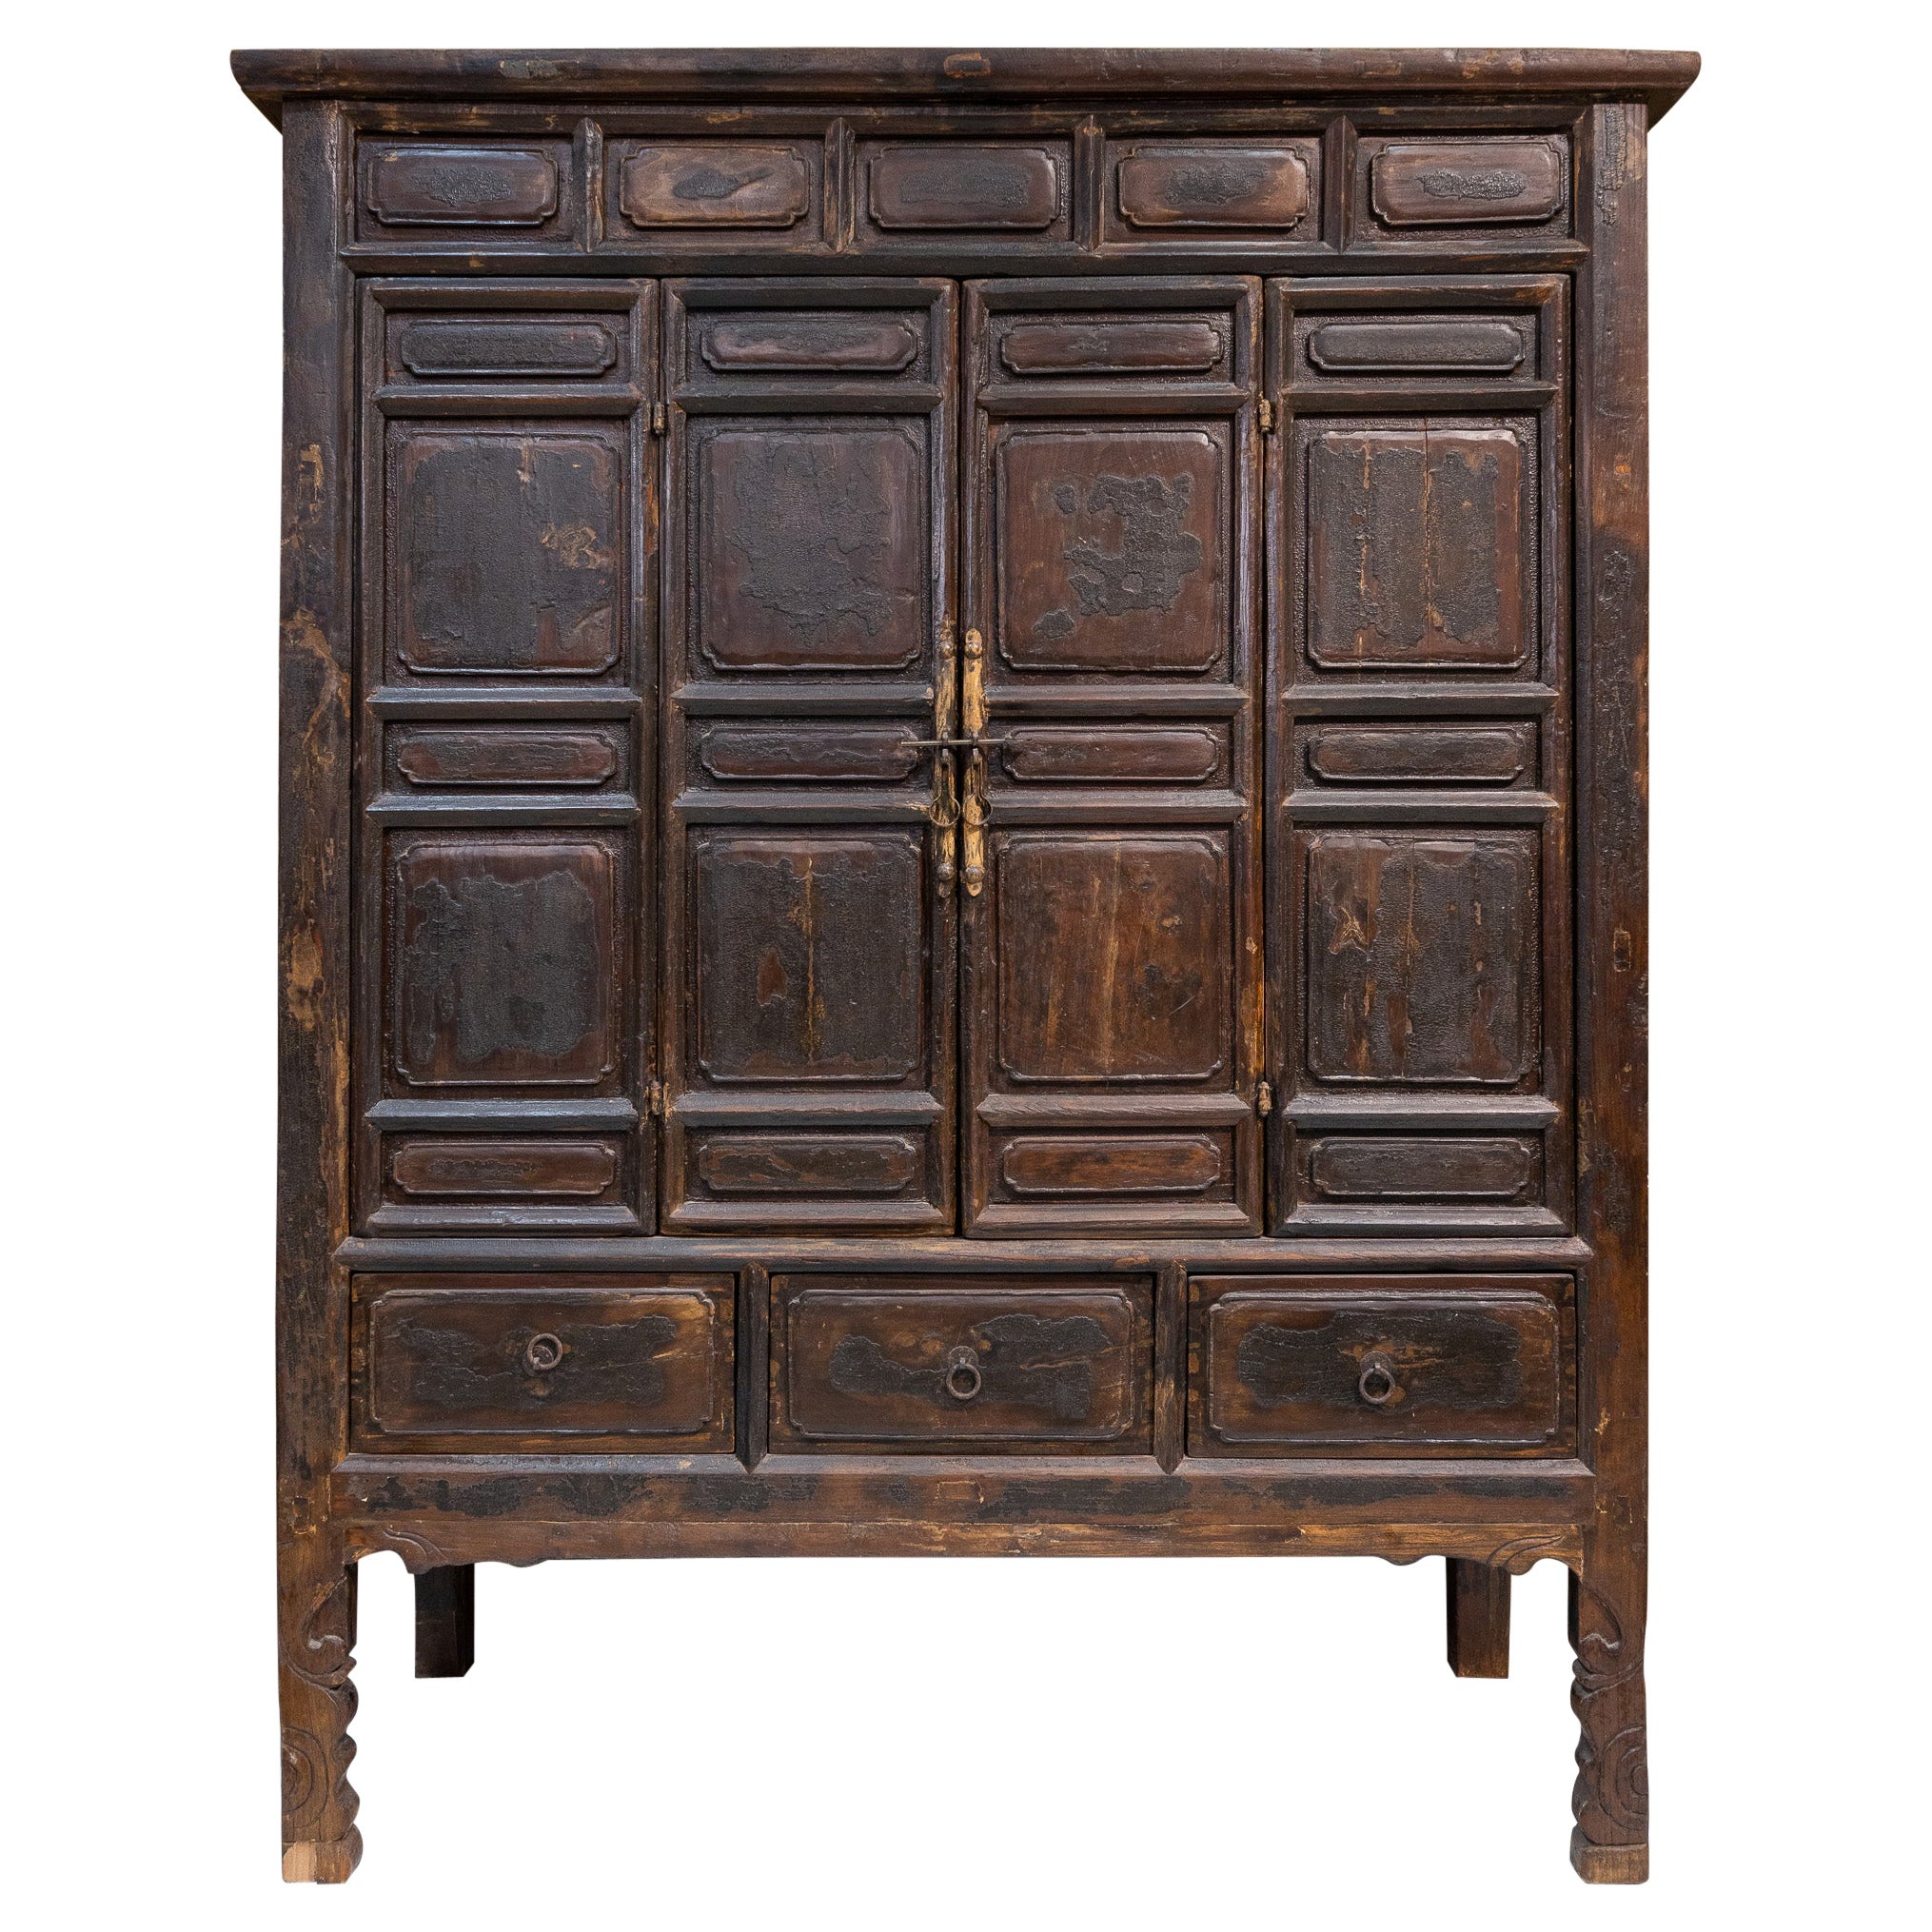 Late 19th Century Large Cabinet from Shanxi, China